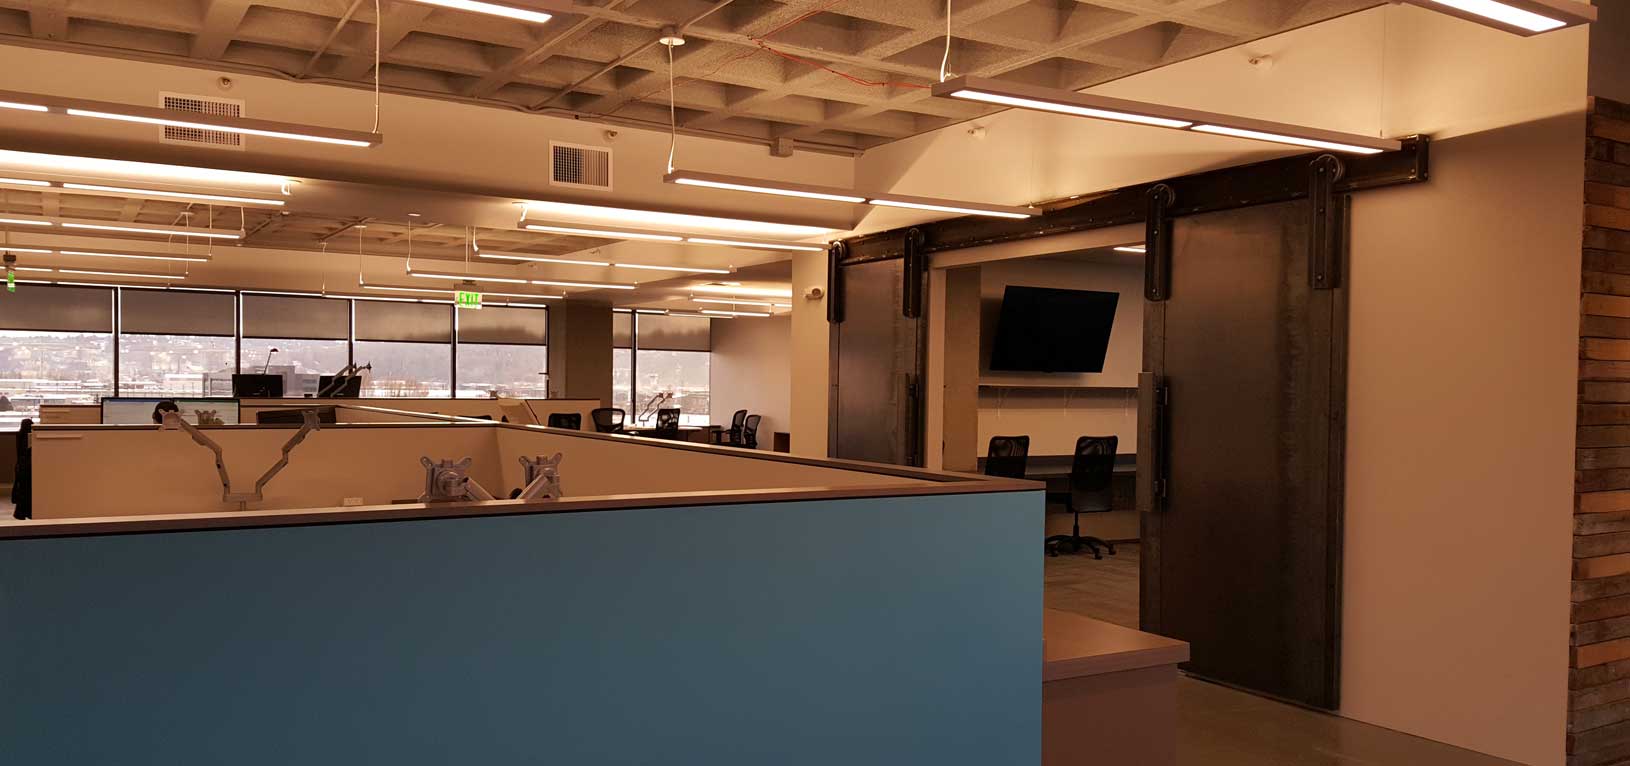 Tacoma Commercial Window Covering Installation and Cubicle Curtain Installation